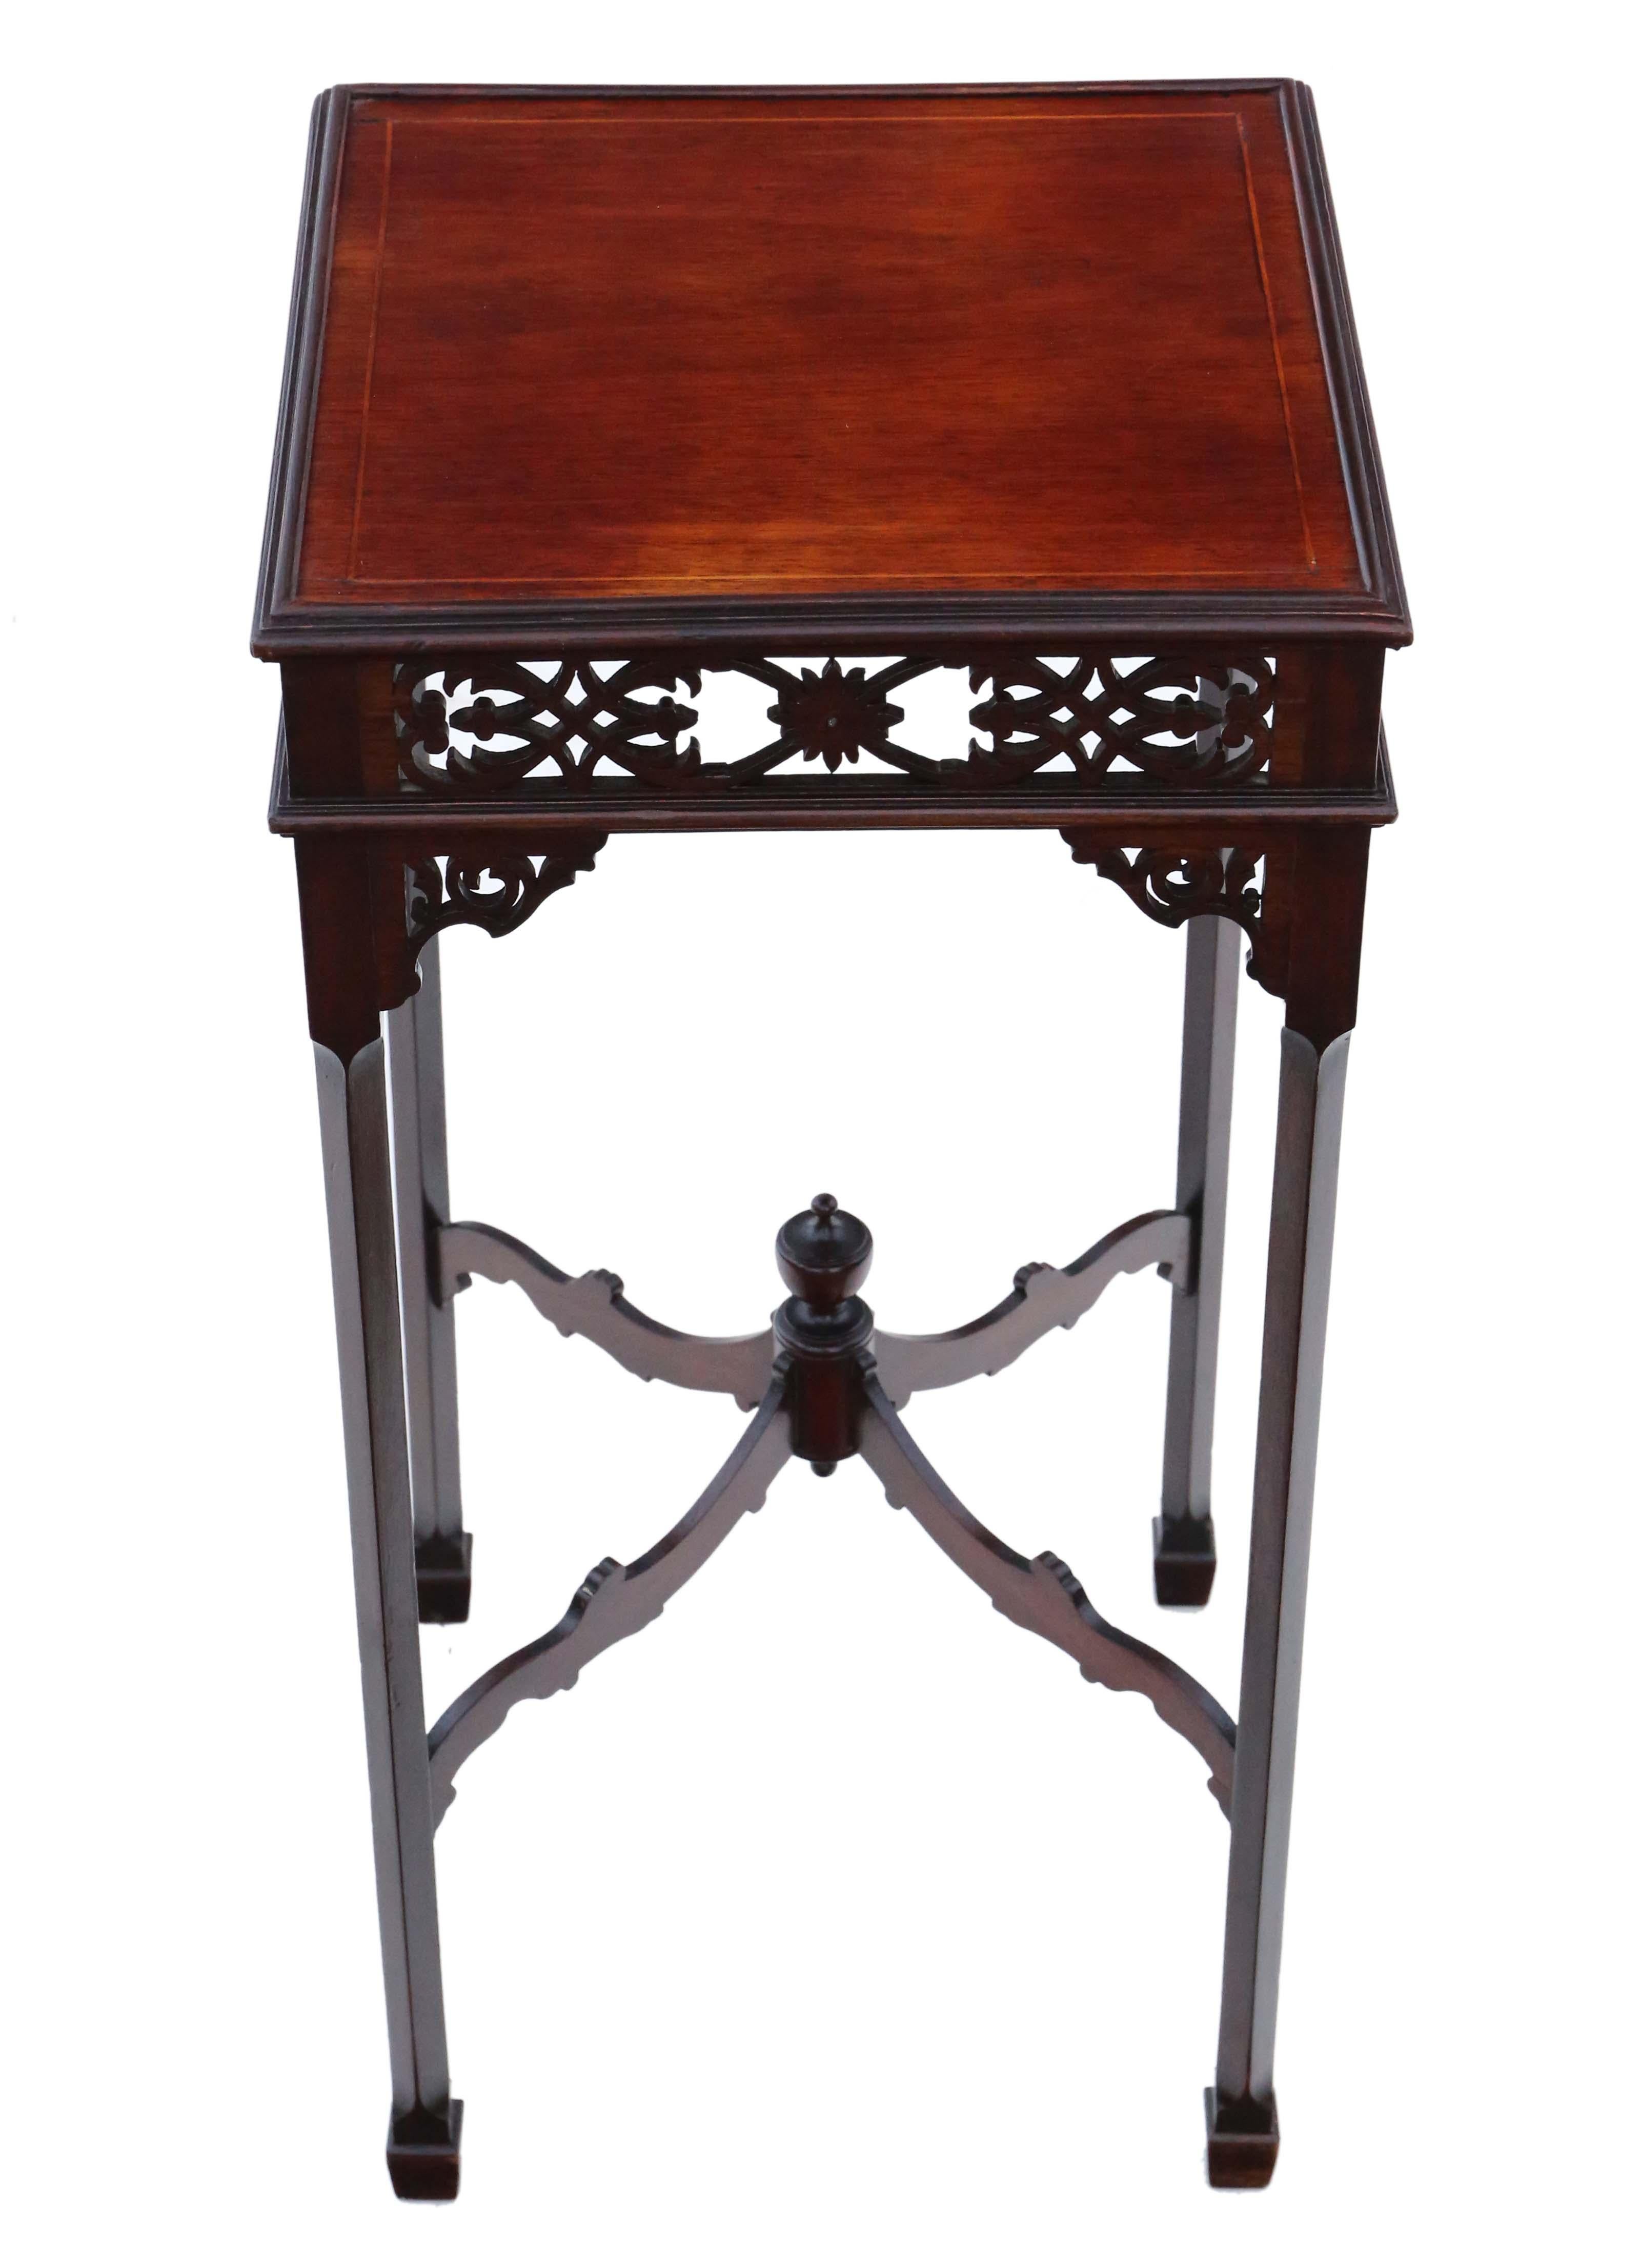 Antique mahogany side occasional pedestal table stand C1920 In Good Condition For Sale In Wisbech, Cambridgeshire